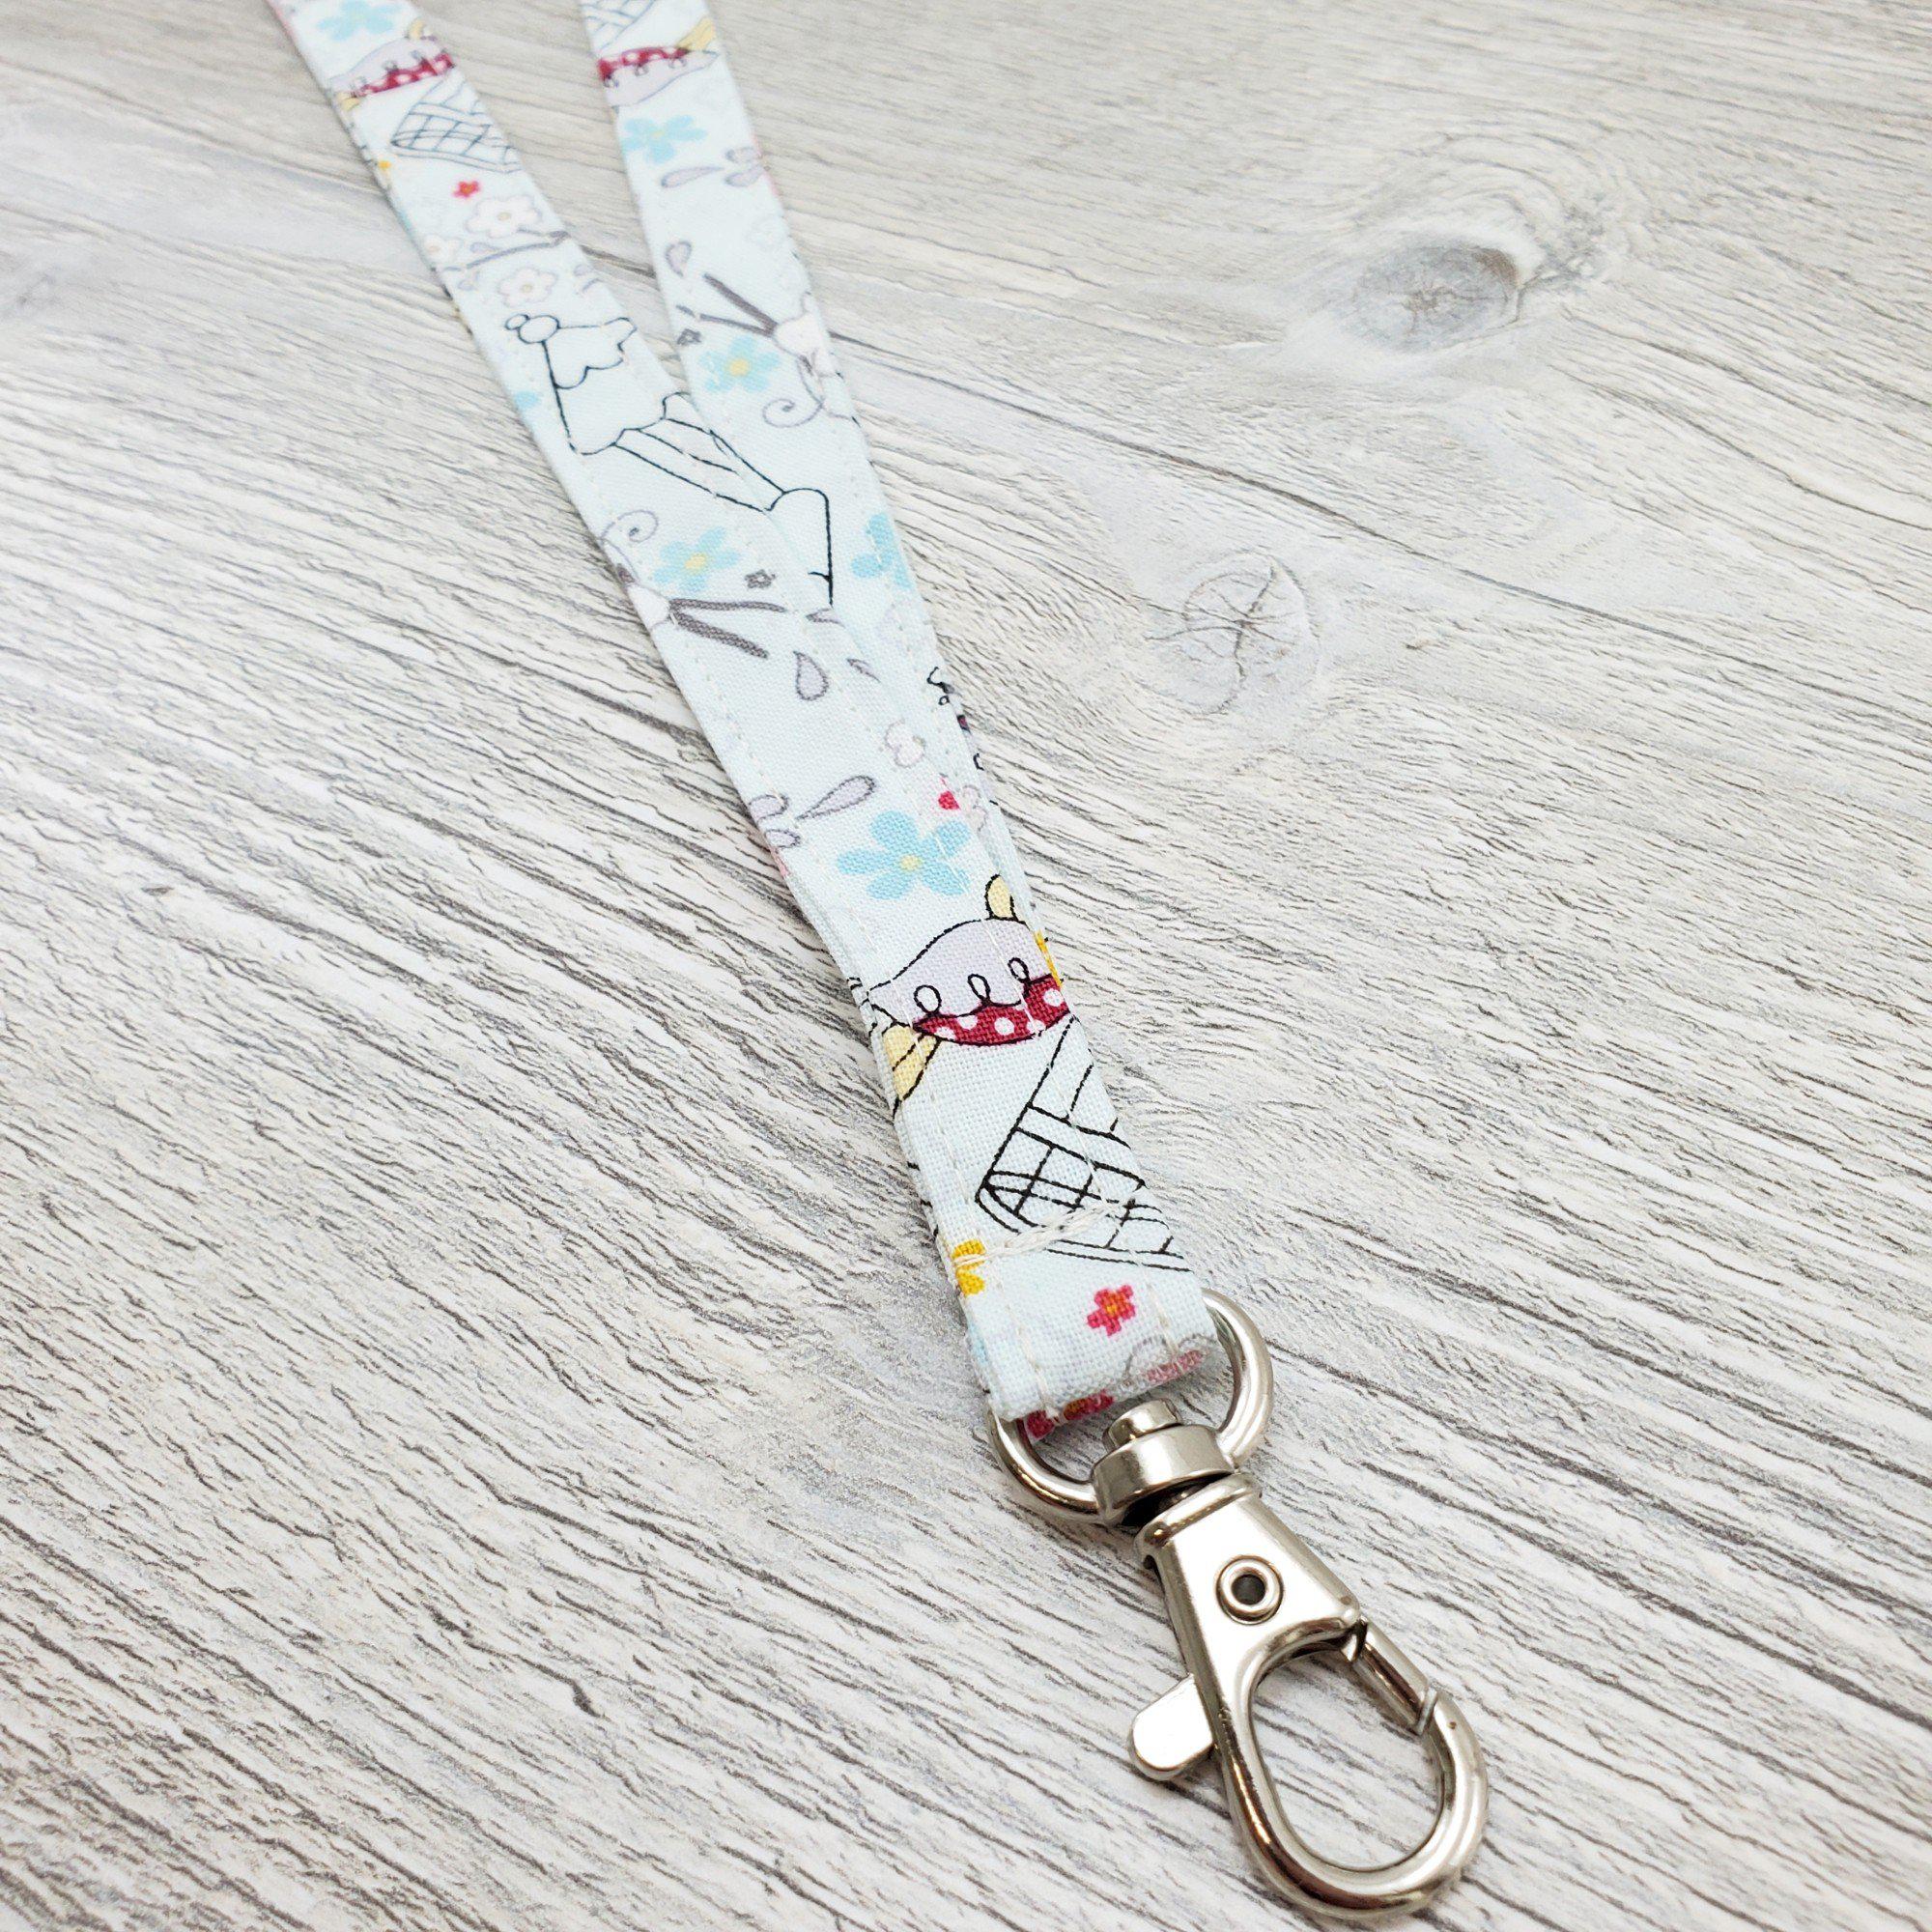 Skinny Fabric Lanyard Birdies All Around with Optional Badge/Vaccine Card Holder - 15" drop & 1/2" wide-The Steady Hand